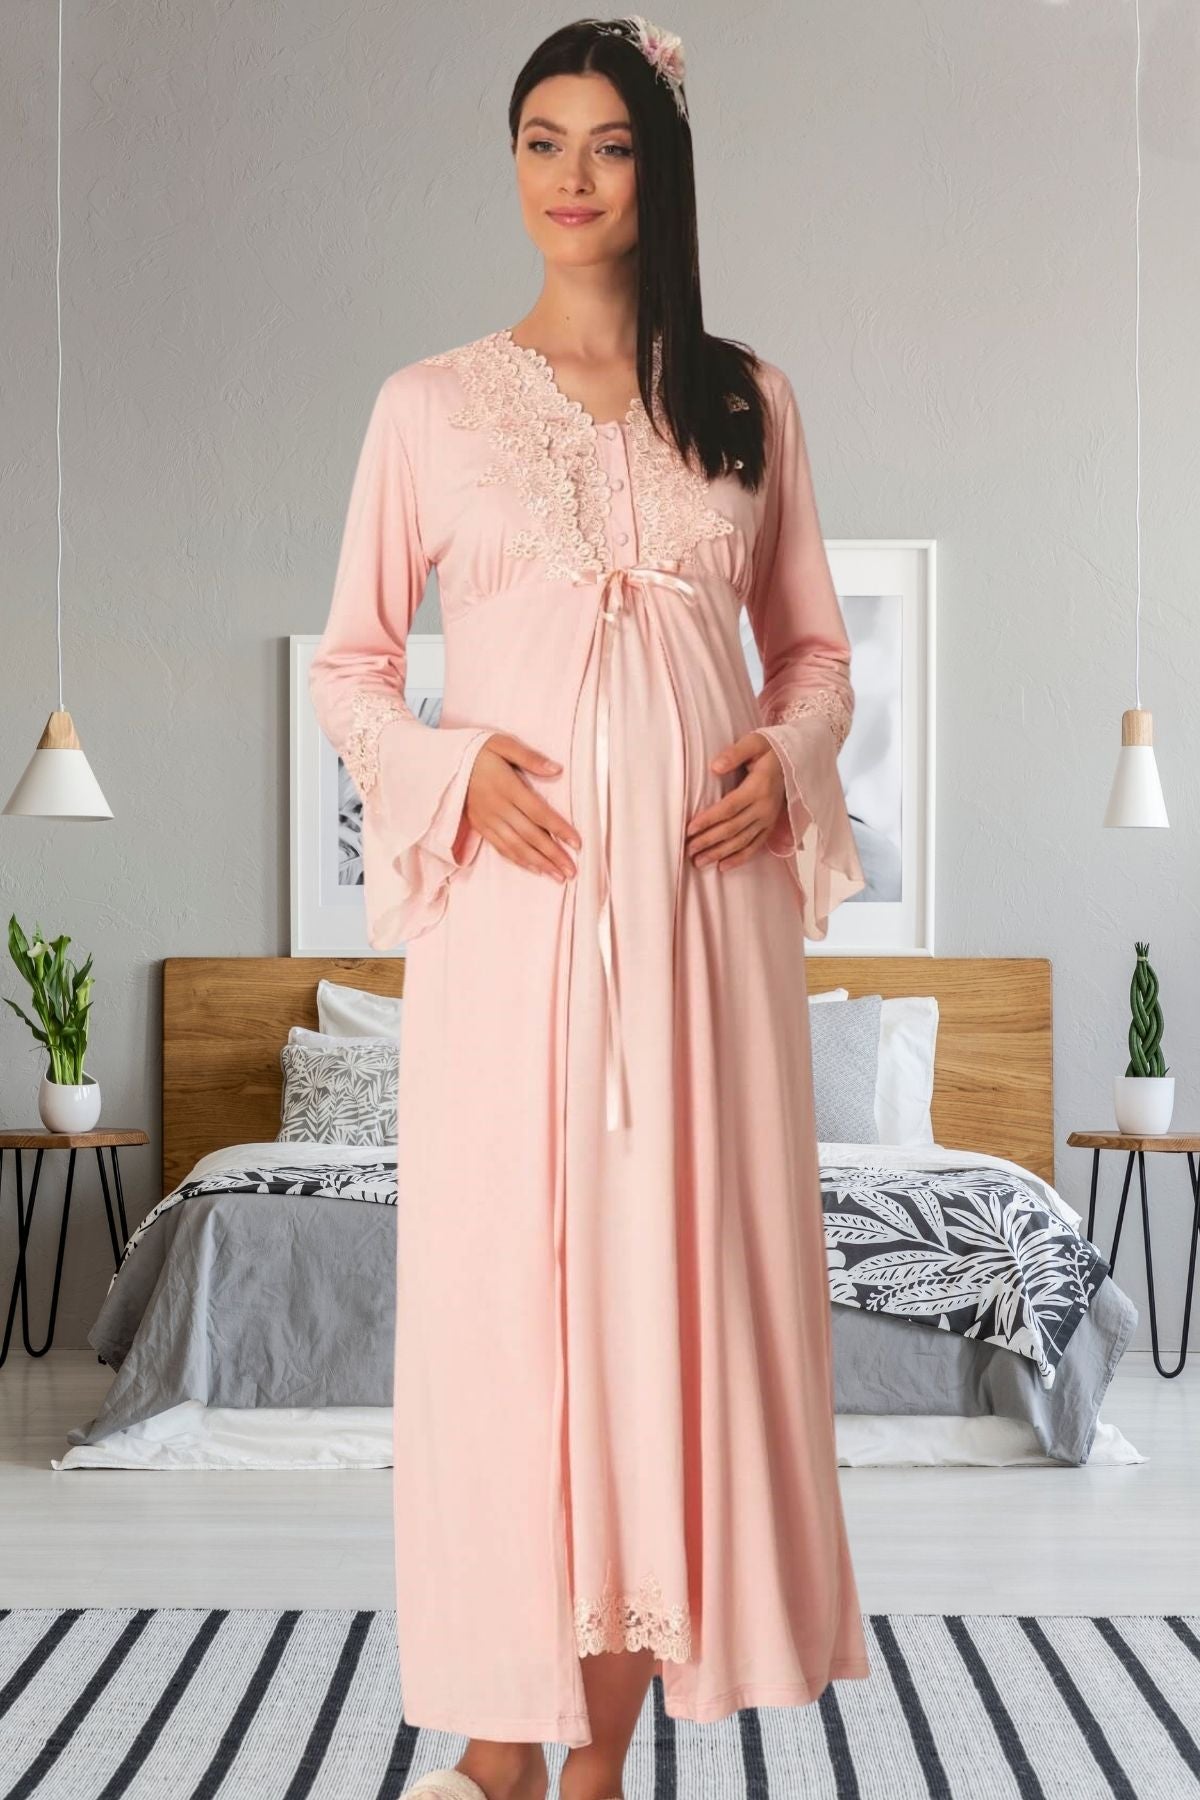 Lace Maternity & Nursing Nightgown With Robe Powder - 1518